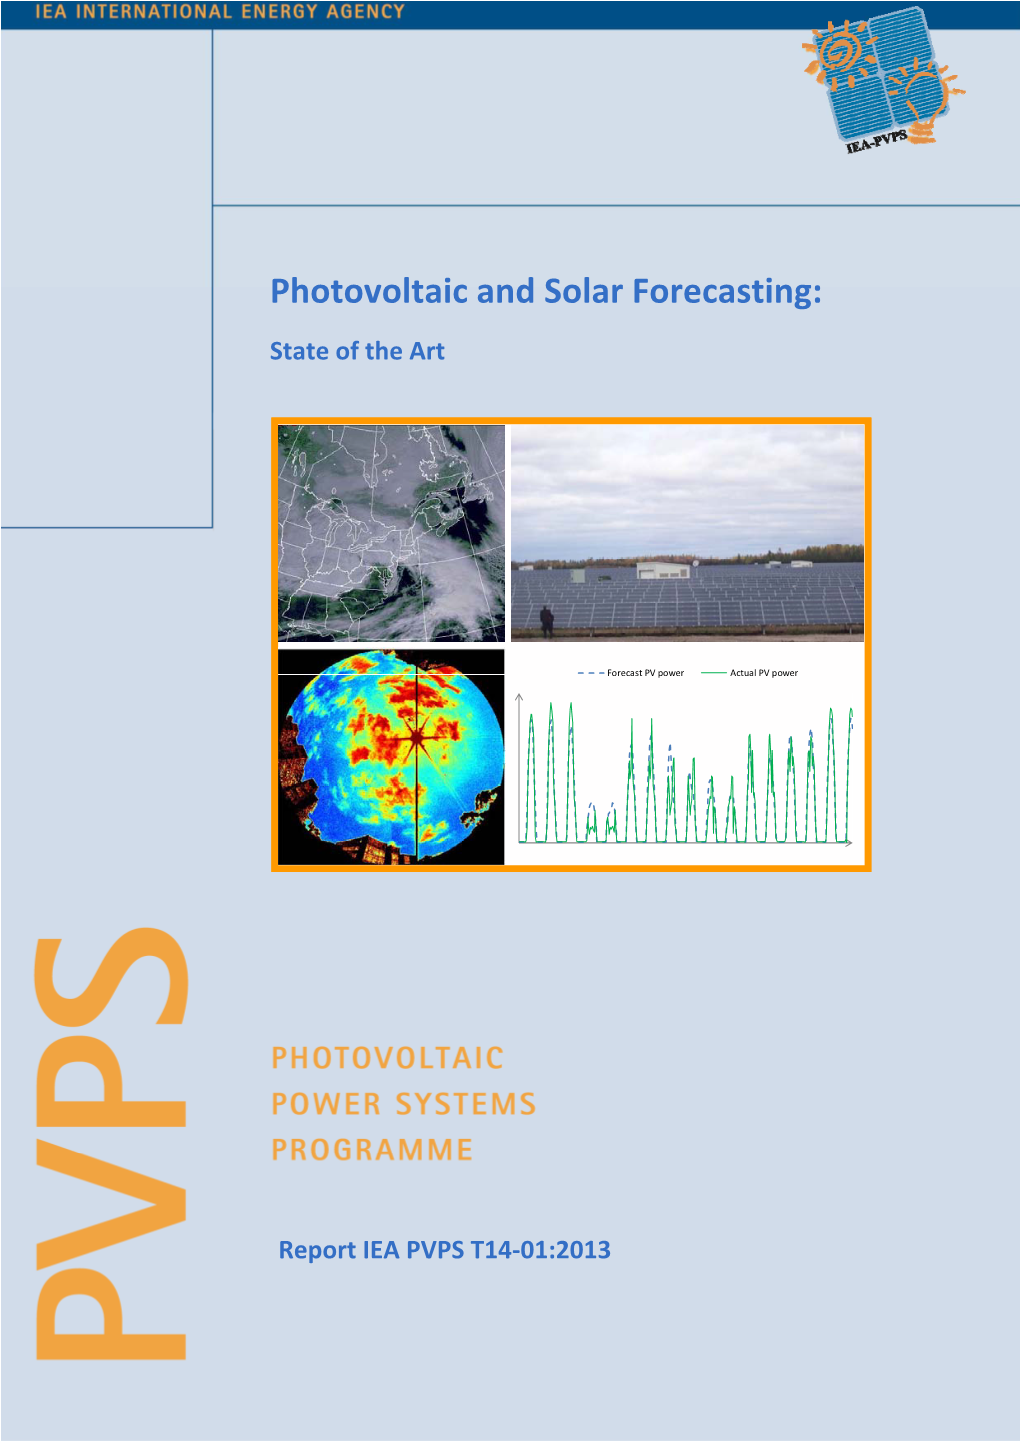 Photovoltaic and Solar Forecasting: State of the Art